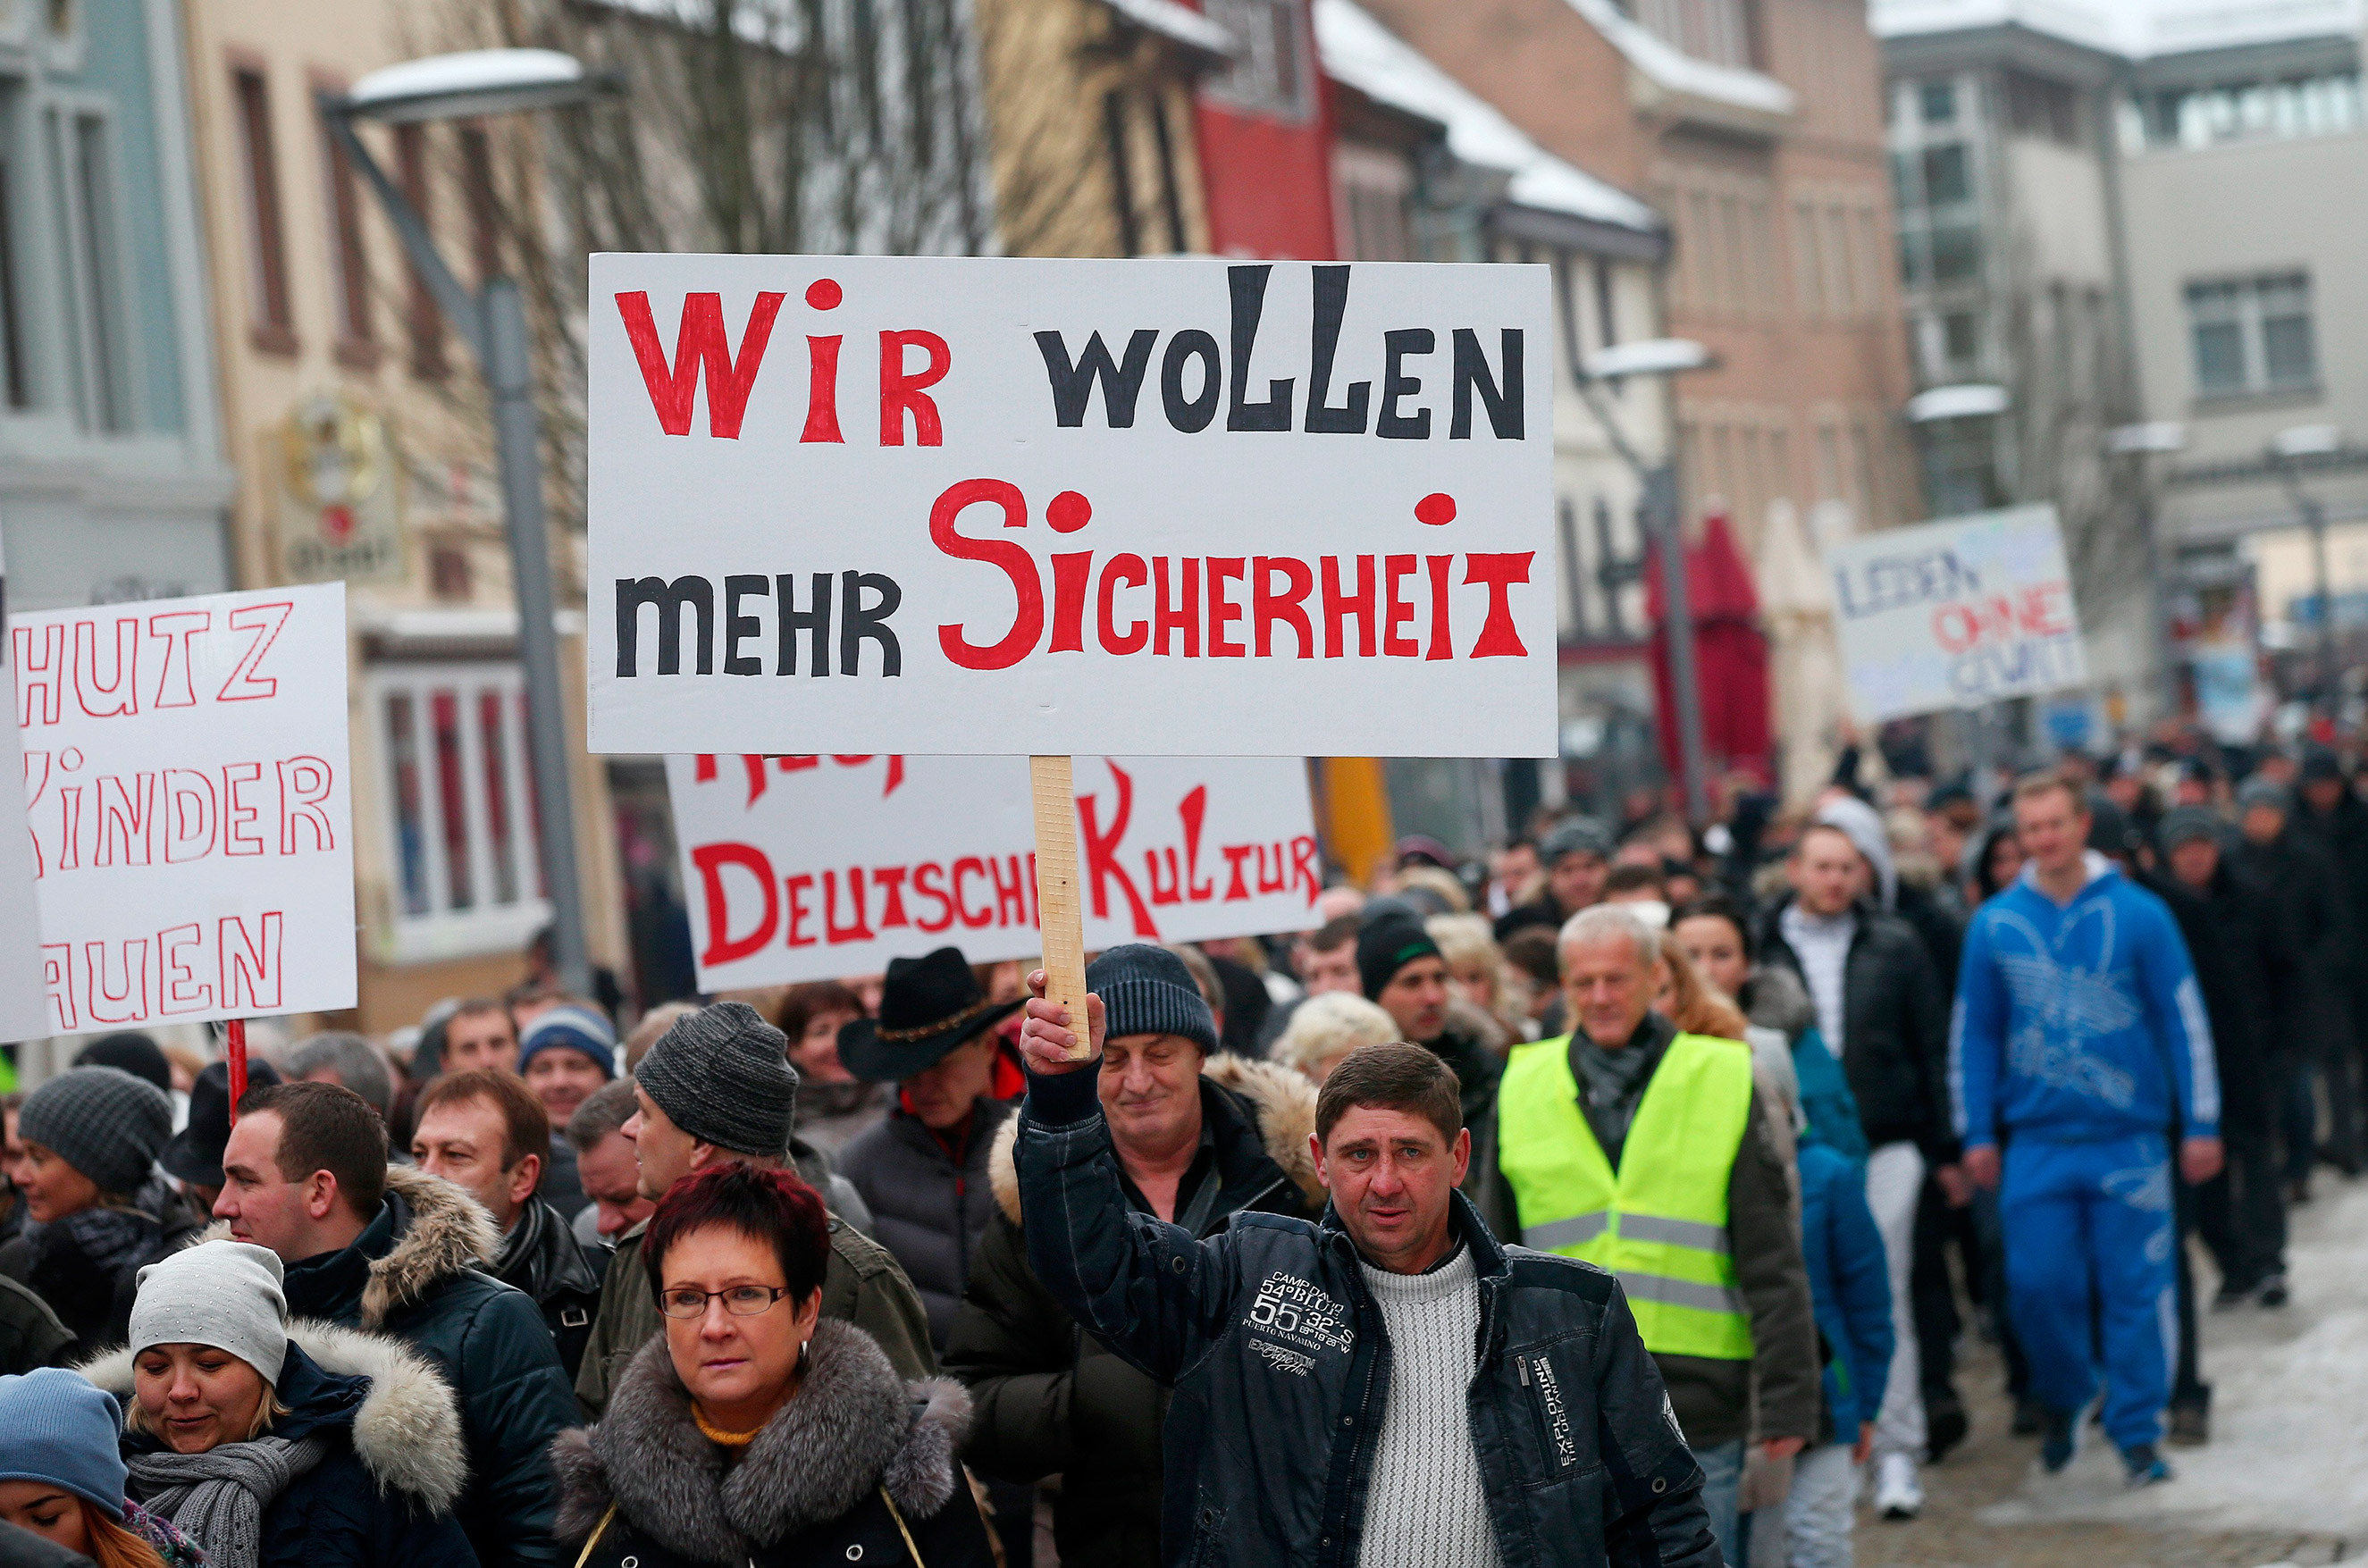 Hundreds of Russlanddeutsche, or ethnic Germans who had formerly lived in Russia, demonstrate with signs reading "we want more security" and against violence in Villingen-Schwenningen, Germany, Jan. 24, 2016. The demonstration took place in connection with the alleged rape of a 13-year-old girl by a refugee, which the police say did not happen. (Marc Eich—DPA/Corbis)